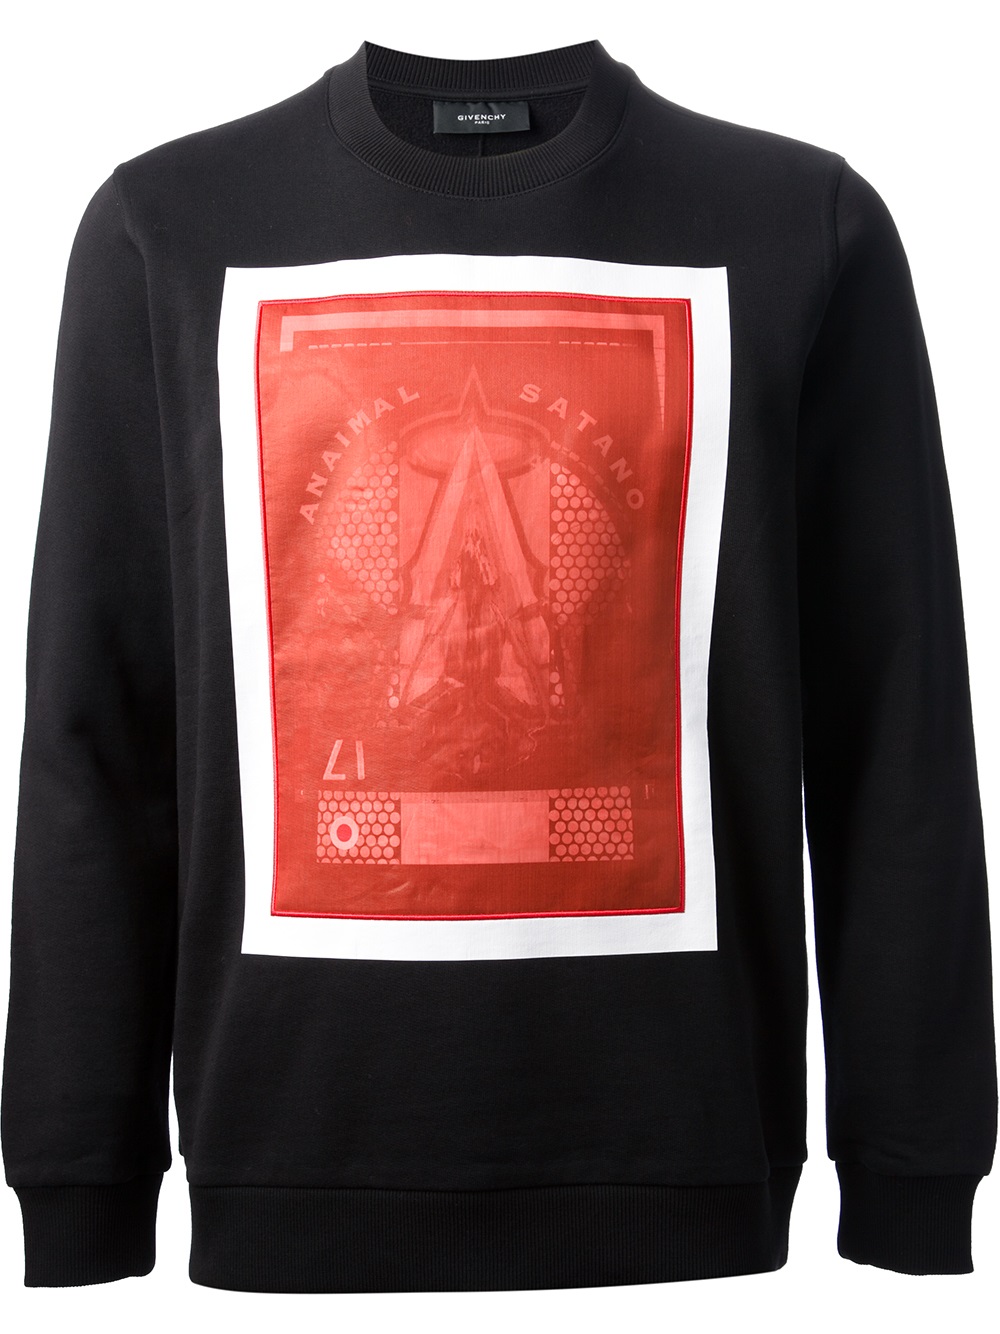 Lyst - Givenchy Printed Sweater in Black for Men